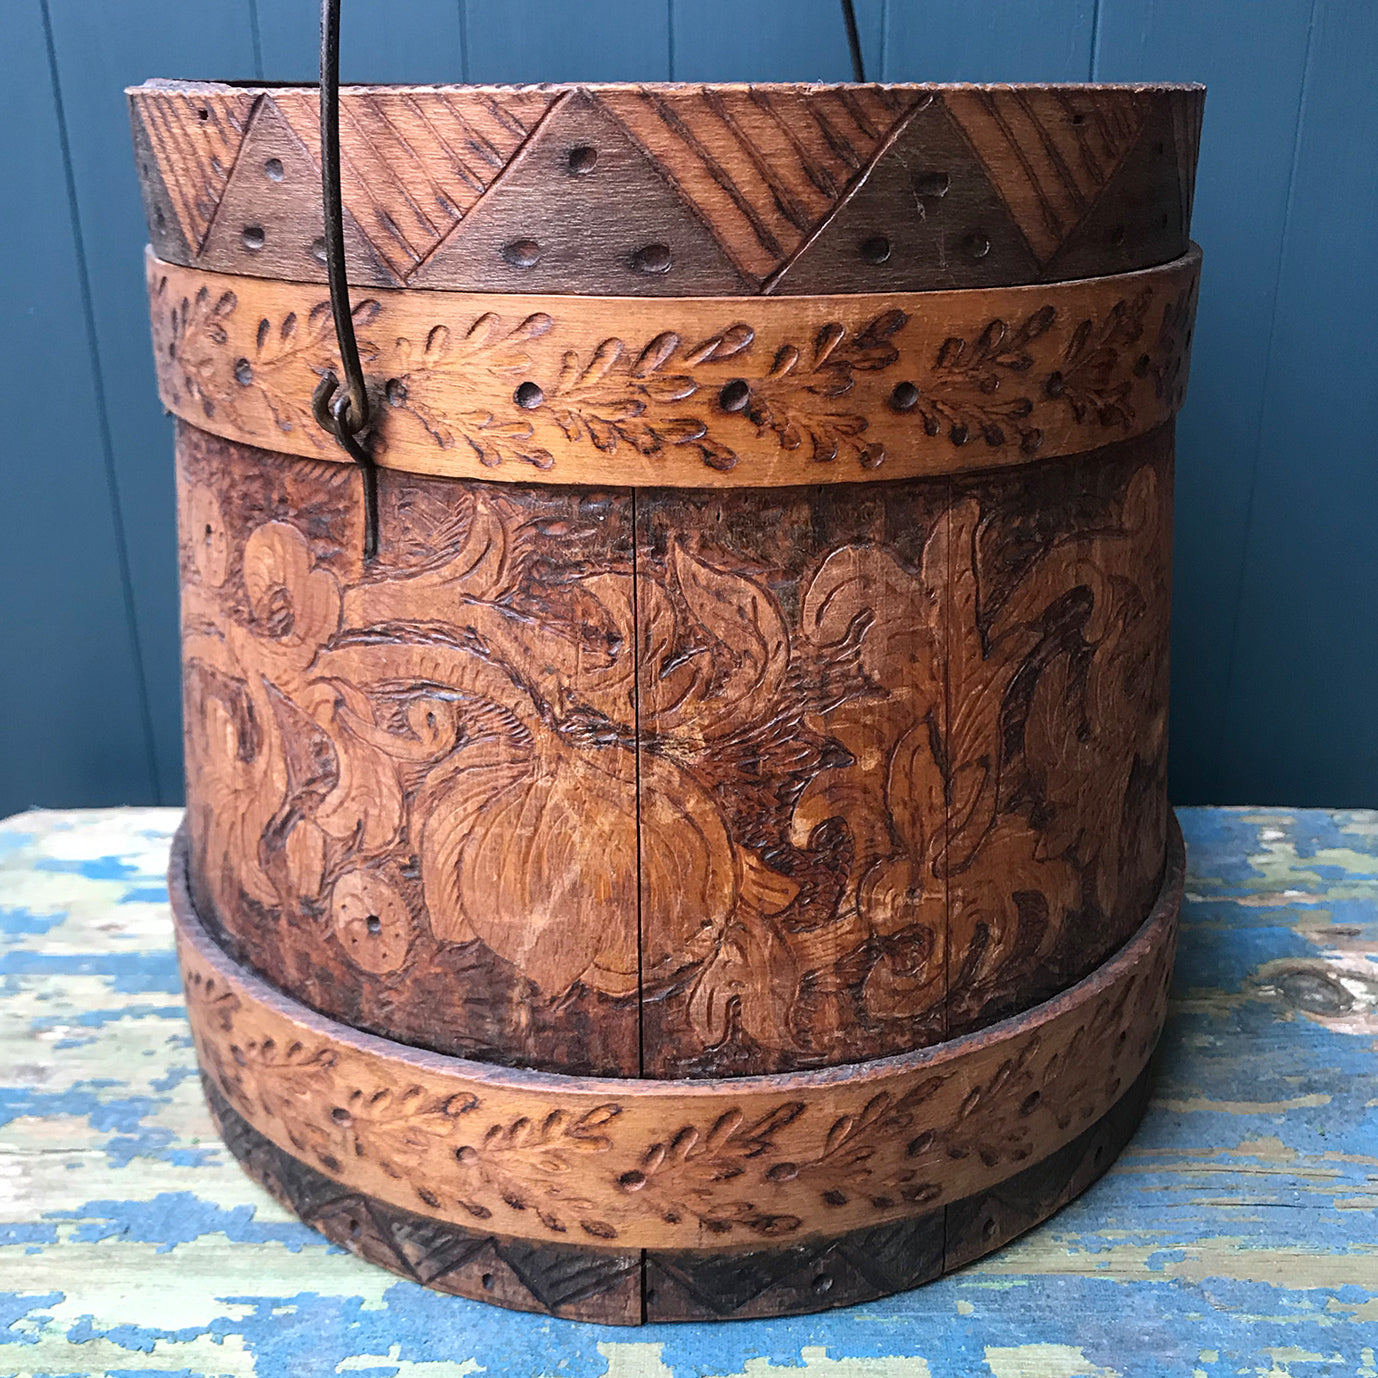 A beautiful early Nordic, carved and hot poker-worked wooden vessel with lid and handle. hand carved with peony and lily flowers and a stylised oak leaf patten on the bindings. would make an ideal biscuit barrel! - SHOP NOW - www.intovintage.co.uk